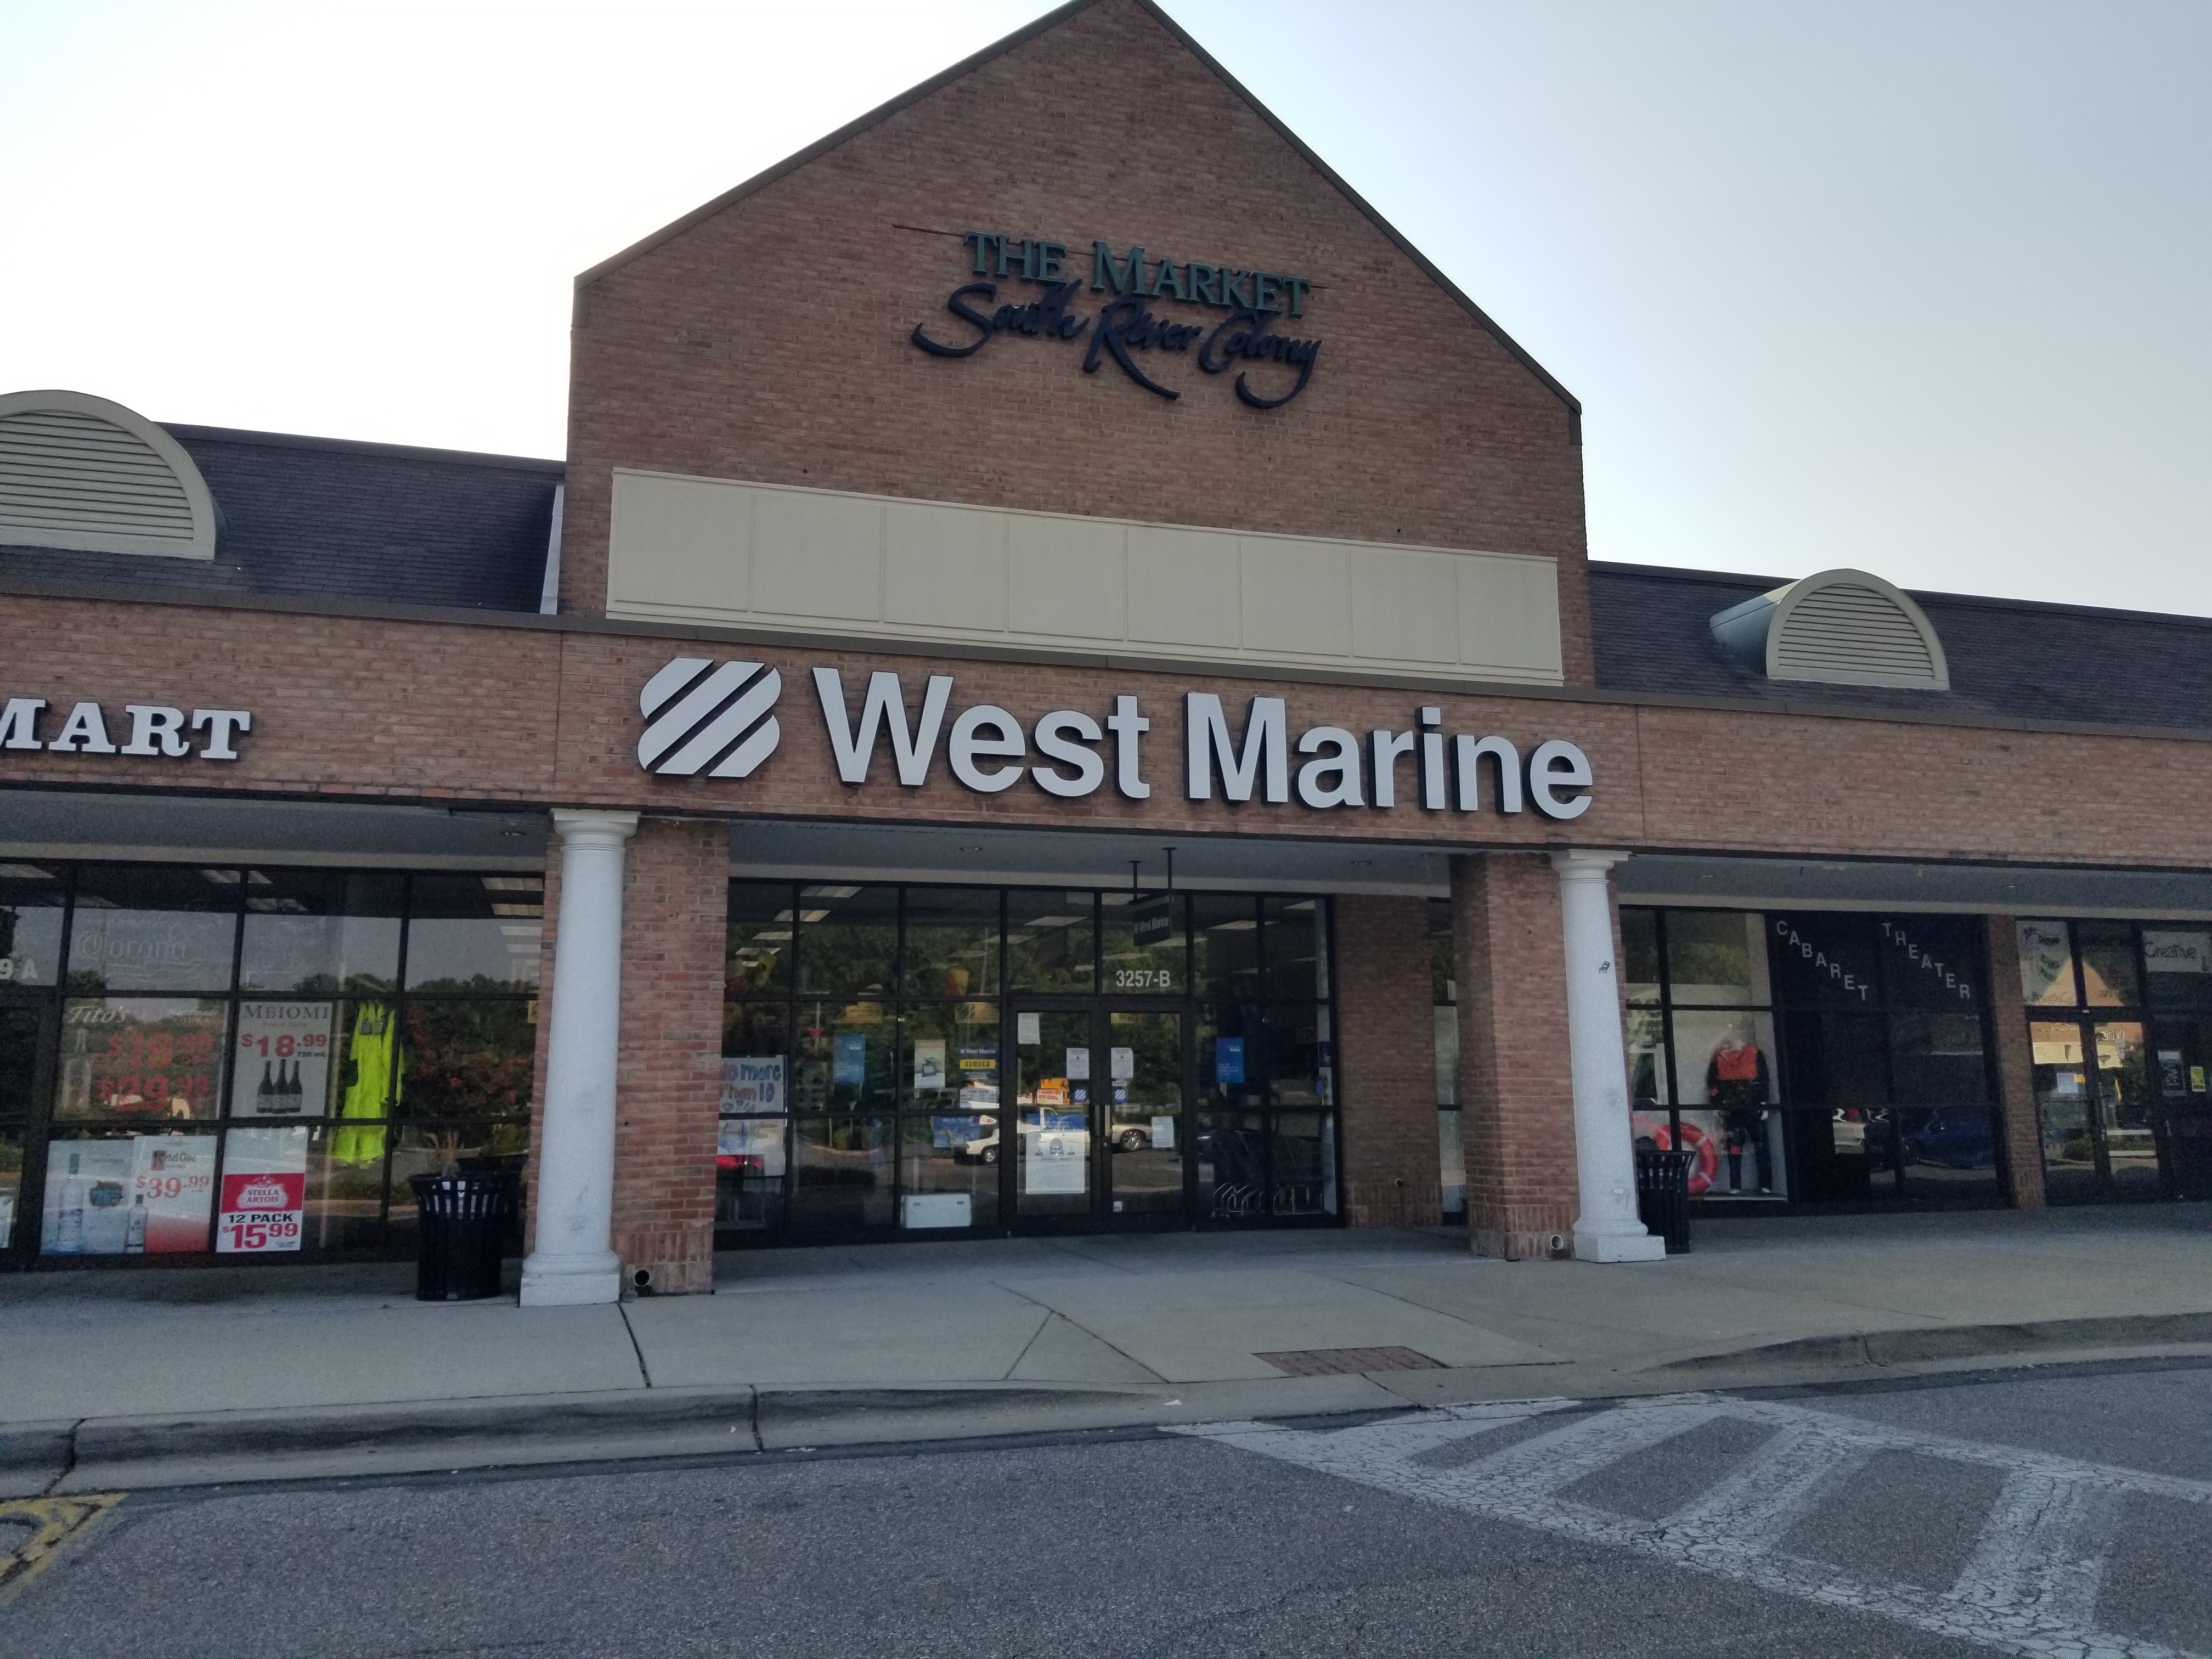 Boat Supplies, Fishing Gear & More - Edgewater, MD 21037